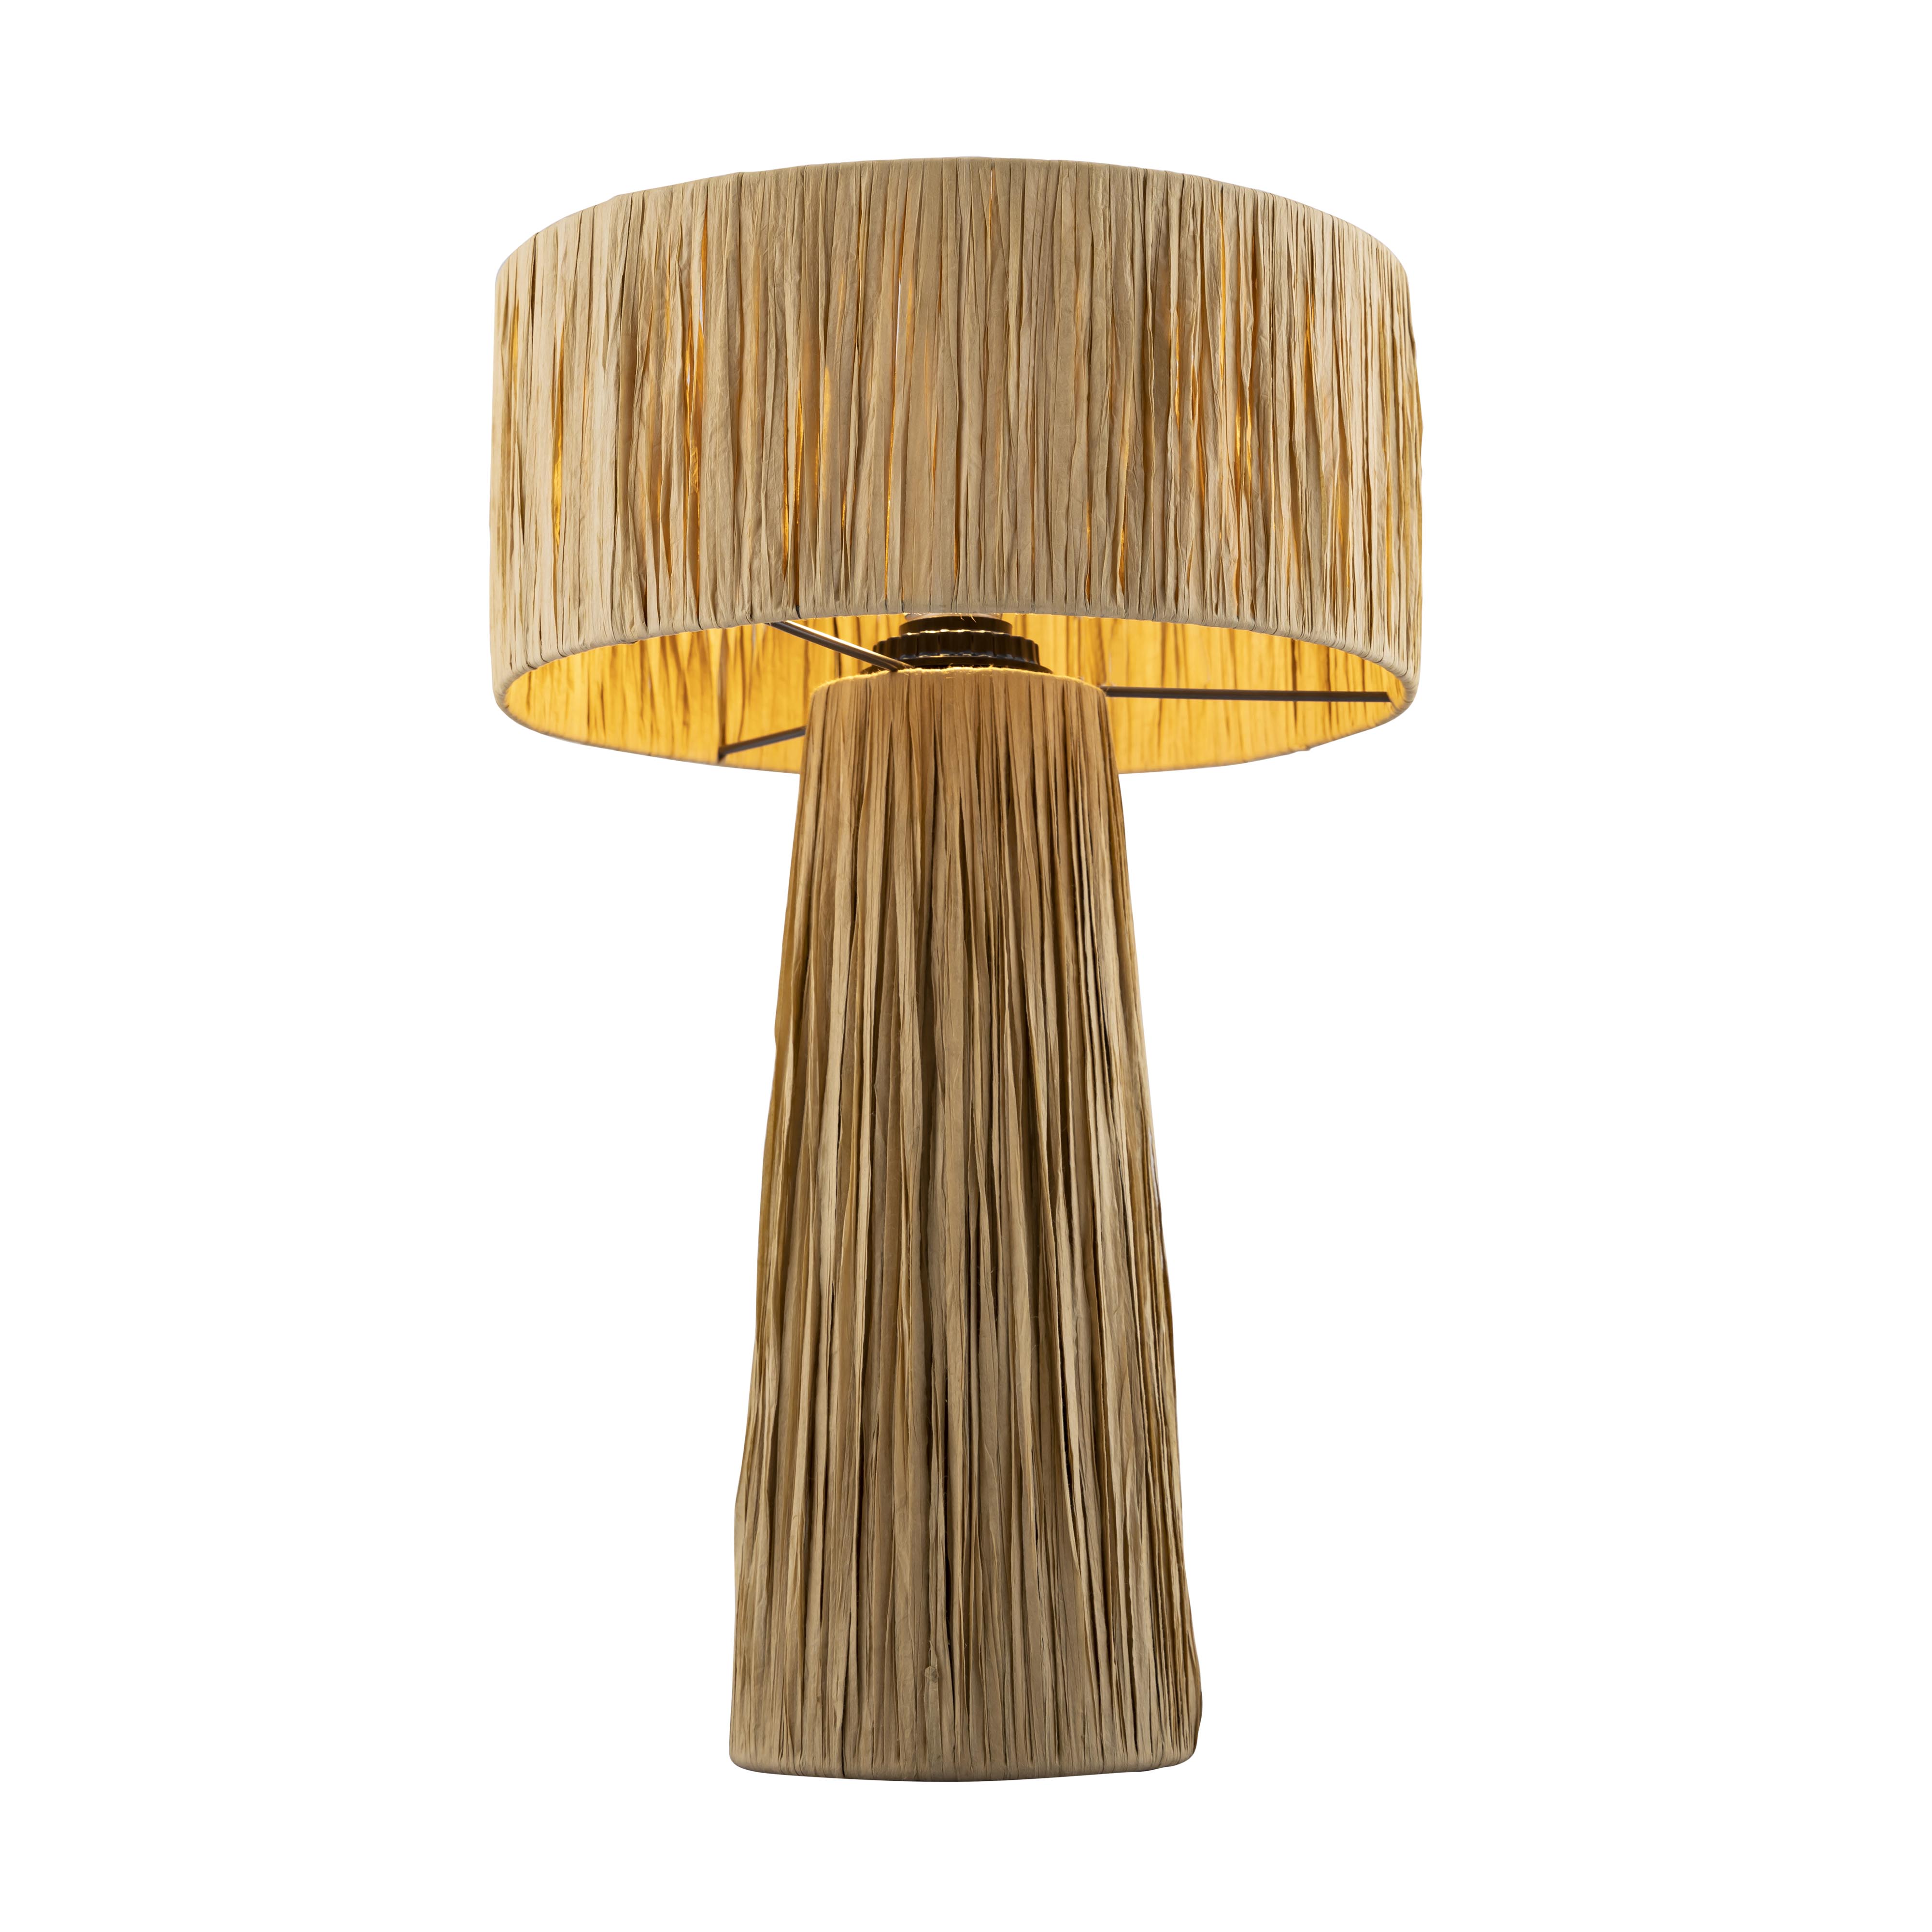 Shelby Rafia Natural Table Lamp - image 5 of 8